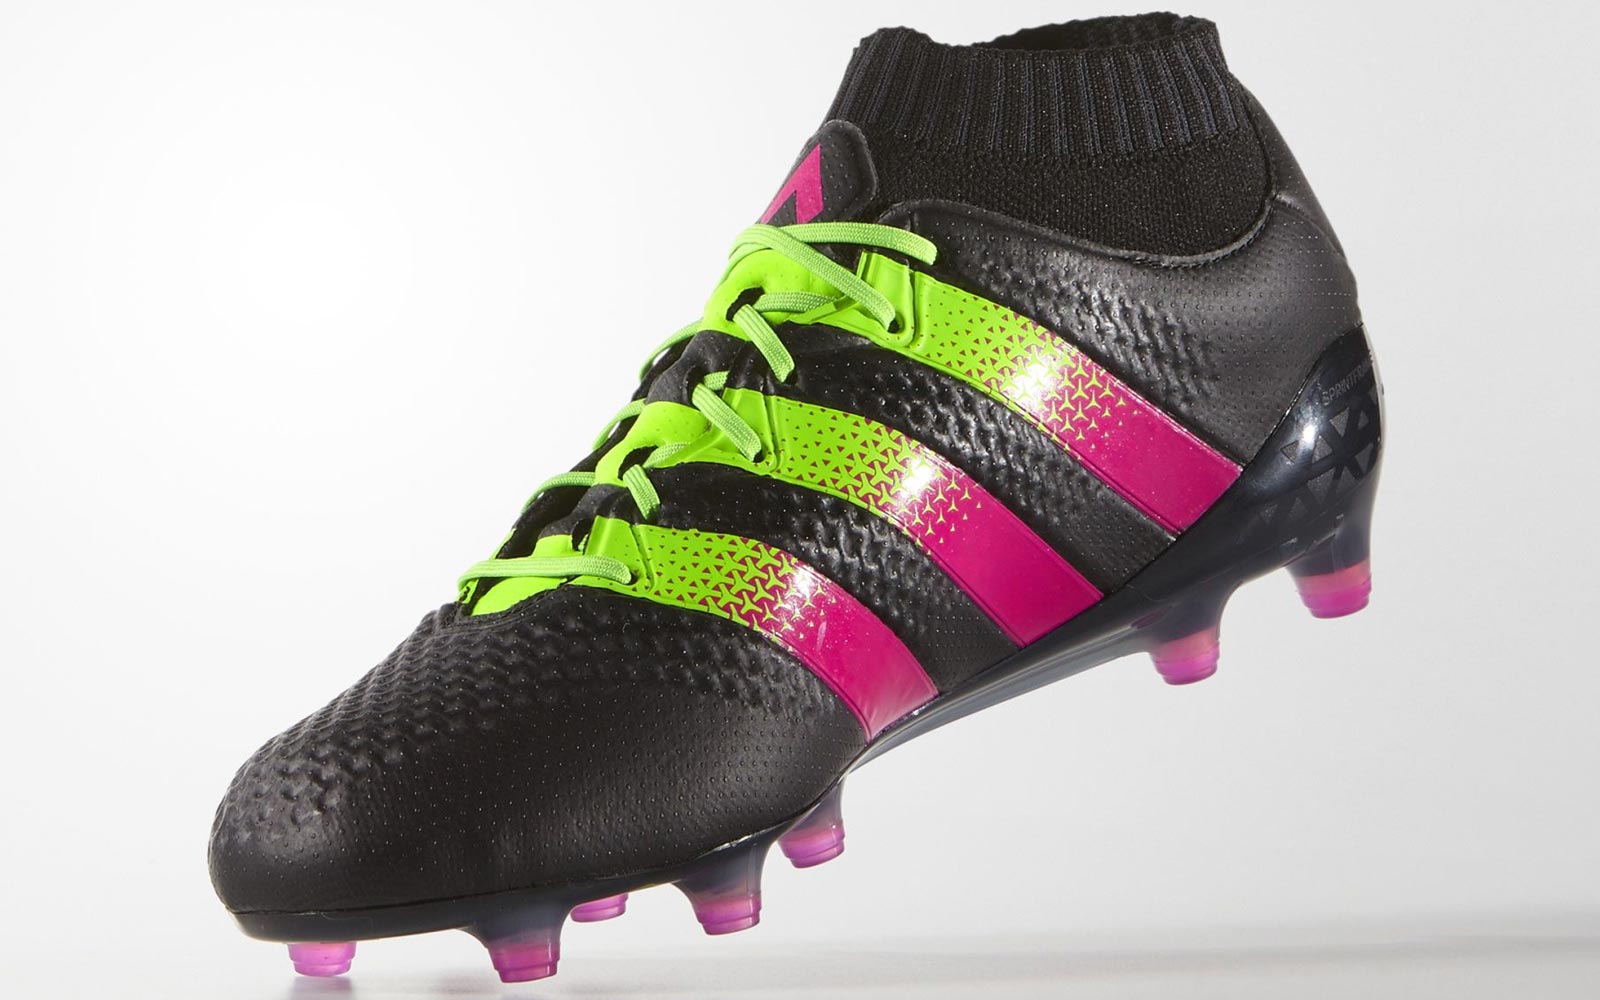 Black / Pink / Green Adidas Ace Primeknit Boots Released - Footy Headlines